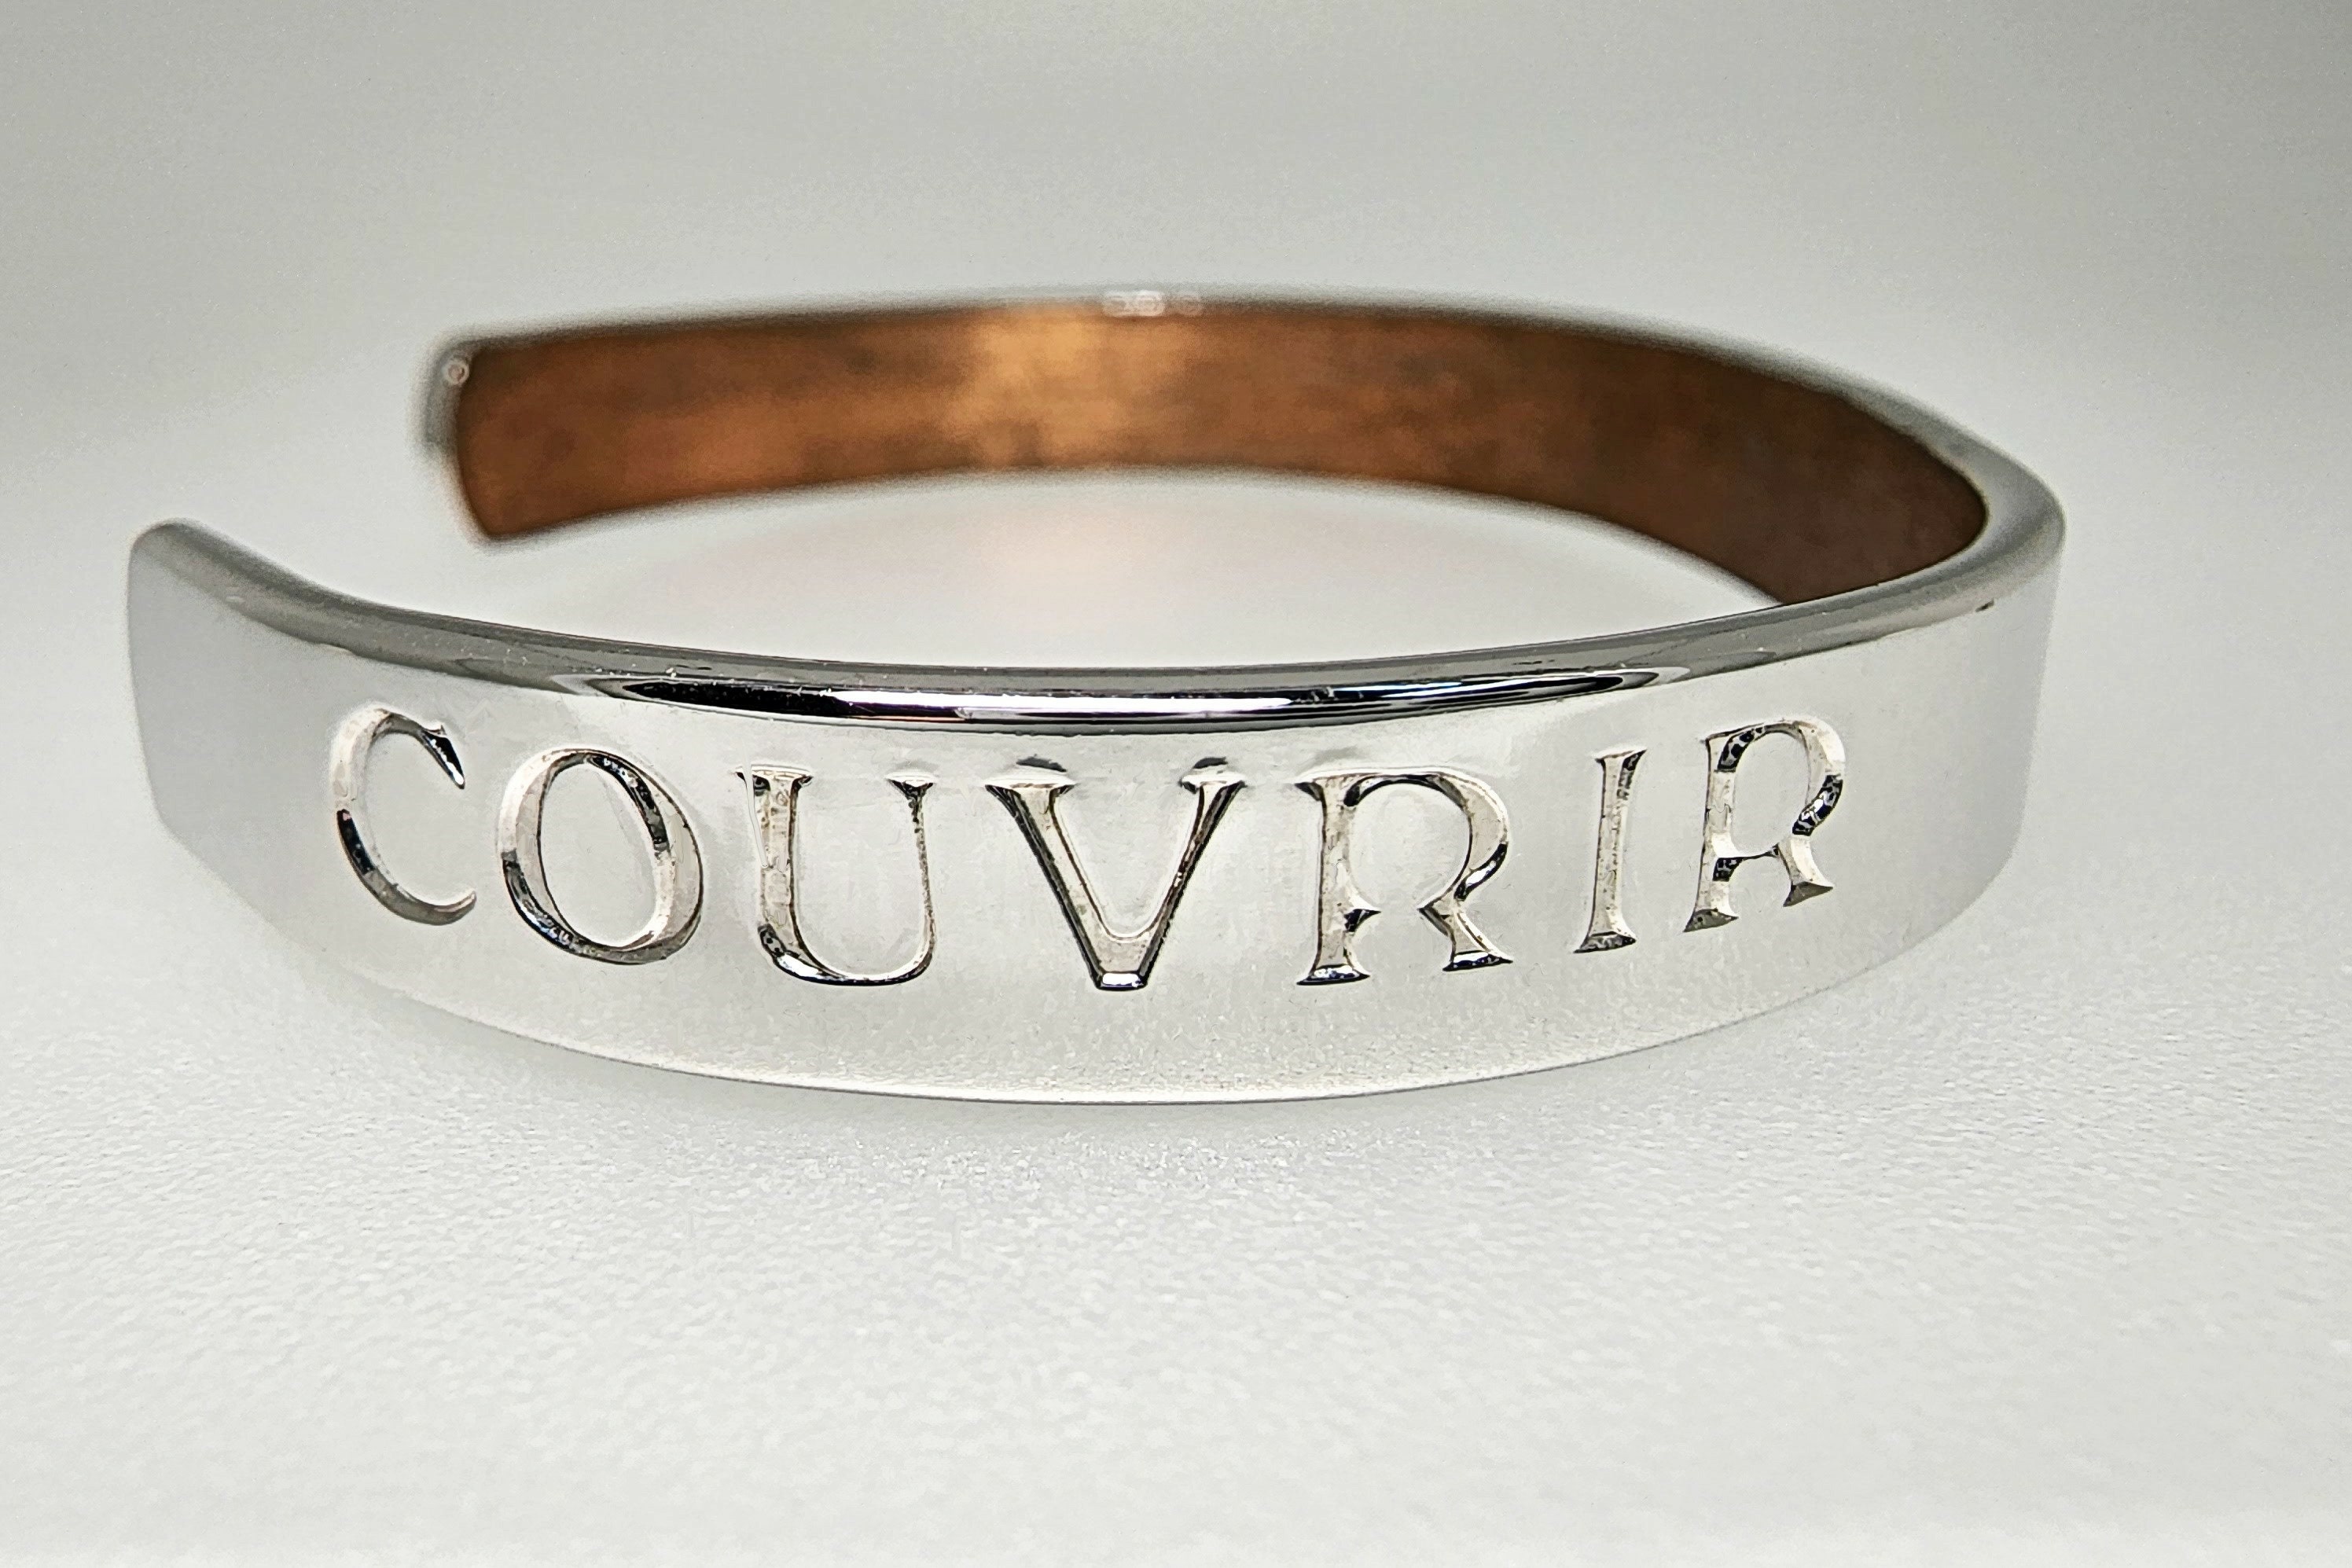 The Lords Prayer Magnetic Bangle Gifts Bracelet Arthritis Pain Relief Rheumatism Earth Magnets Health Management Gifts